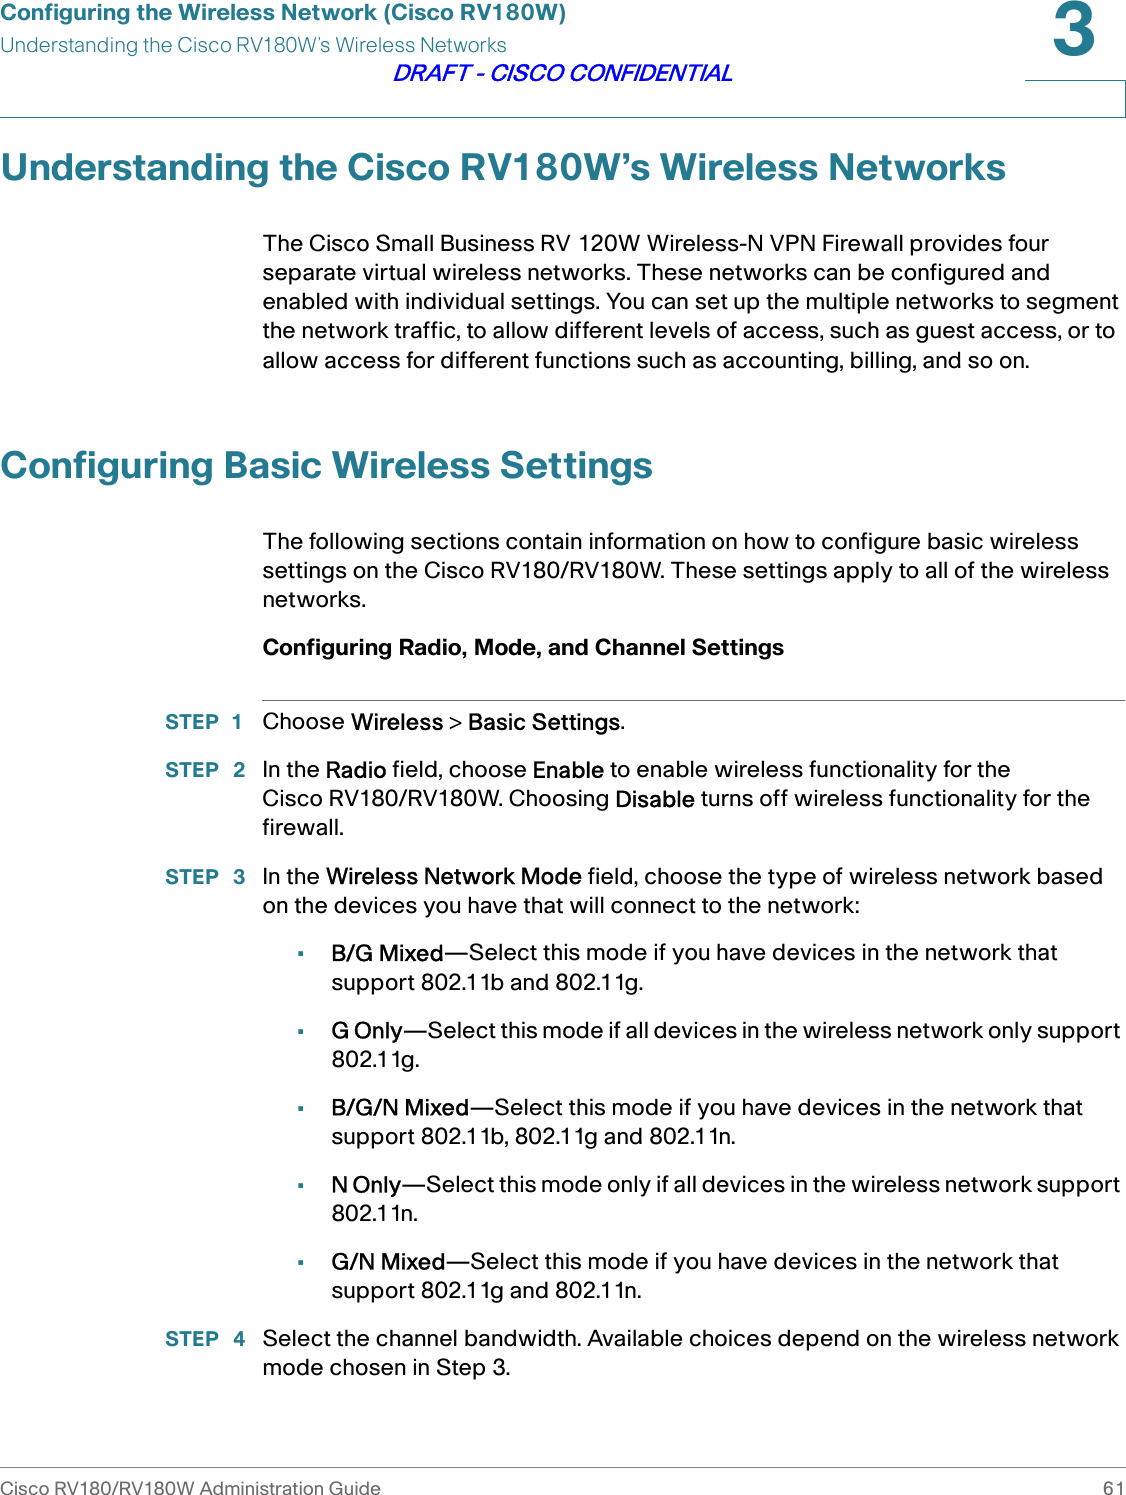 Configuring the Wireless Network (Cisco RV180W)Understanding the Cisco RV180W’s Wireless NetworksCisco RV180/RV180W Administration Guide 613DRAFT - CISCO CONFIDENTIALUnderstanding the Cisco RV180W’s Wireless NetworksThe Cisco Small Business RV 120W Wireless-N VPN Firewall provides four separate virtual wireless networks. These networks can be configured and enabled with individual settings. You can set up the multiple networks to segment the network traffic, to allow different levels of access, such as guest access, or to allow access for different functions such as accounting, billing, and so on.Configuring Basic Wireless SettingsThe following sections contain information on how to configure basic wireless settings on the Cisco RV180/RV180W. These settings apply to all of the wireless networks.Configuring Radio, Mode, and Channel SettingsSTEP 1 Choose Wireless &gt; Basic Settings.STEP  2 In the Radio field, choose Enable to enable wireless functionality for the Cisco RV180/RV180W. Choosing Disable turns off wireless functionality for the firewall.STEP  3 In the Wireless Network Mode field, choose the type of wireless network based on the devices you have that will connect to the network:•B/G Mixed—Select this mode if you have devices in the network that support 802.11b and 802.11g.•G Only—Select this mode if all devices in the wireless network only support 802.11g.•B/G/N Mixed—Select this mode if you have devices in the network that support 802.11b, 802.11g and 802.11n.•N Only—Select this mode only if all devices in the wireless network support 802.11n. •G/N Mixed—Select this mode if you have devices in the network that support 802.11g and 802.11n.STEP  4 Select the channel bandwidth. Available choices depend on the wireless network mode chosen in Step 3.